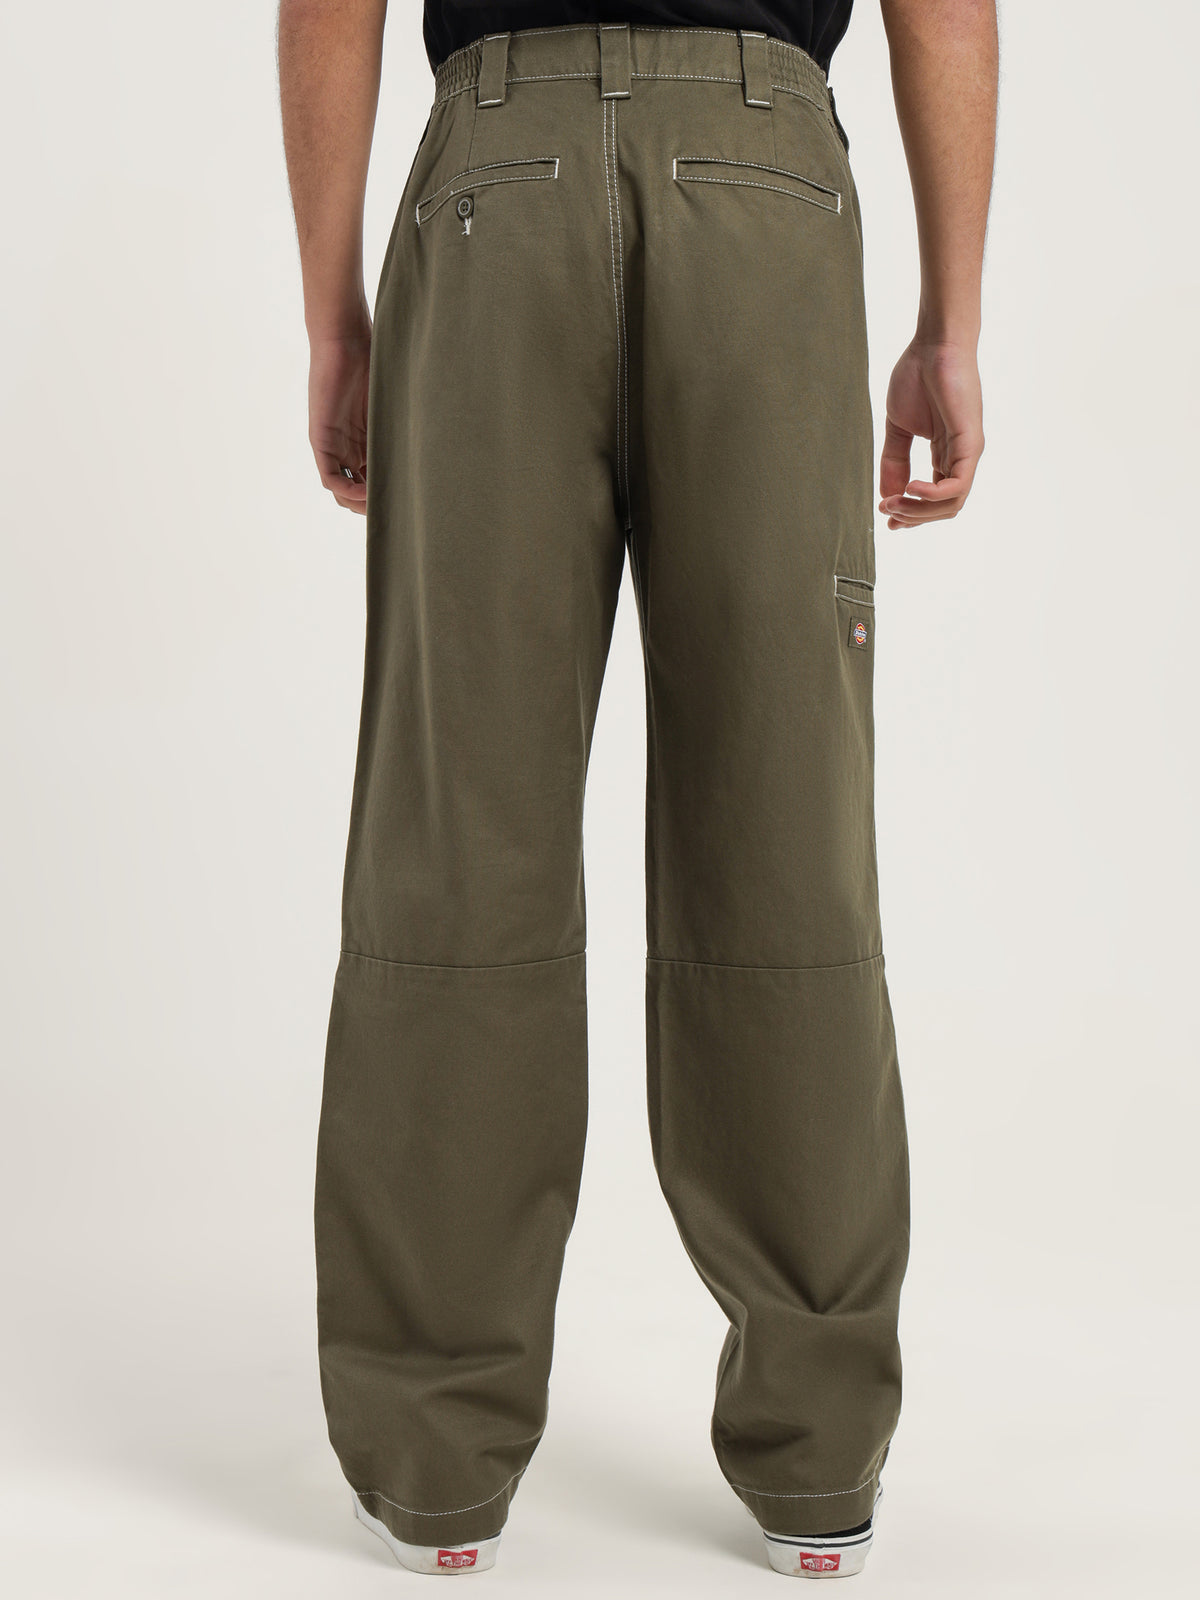 Florala Pants in Military